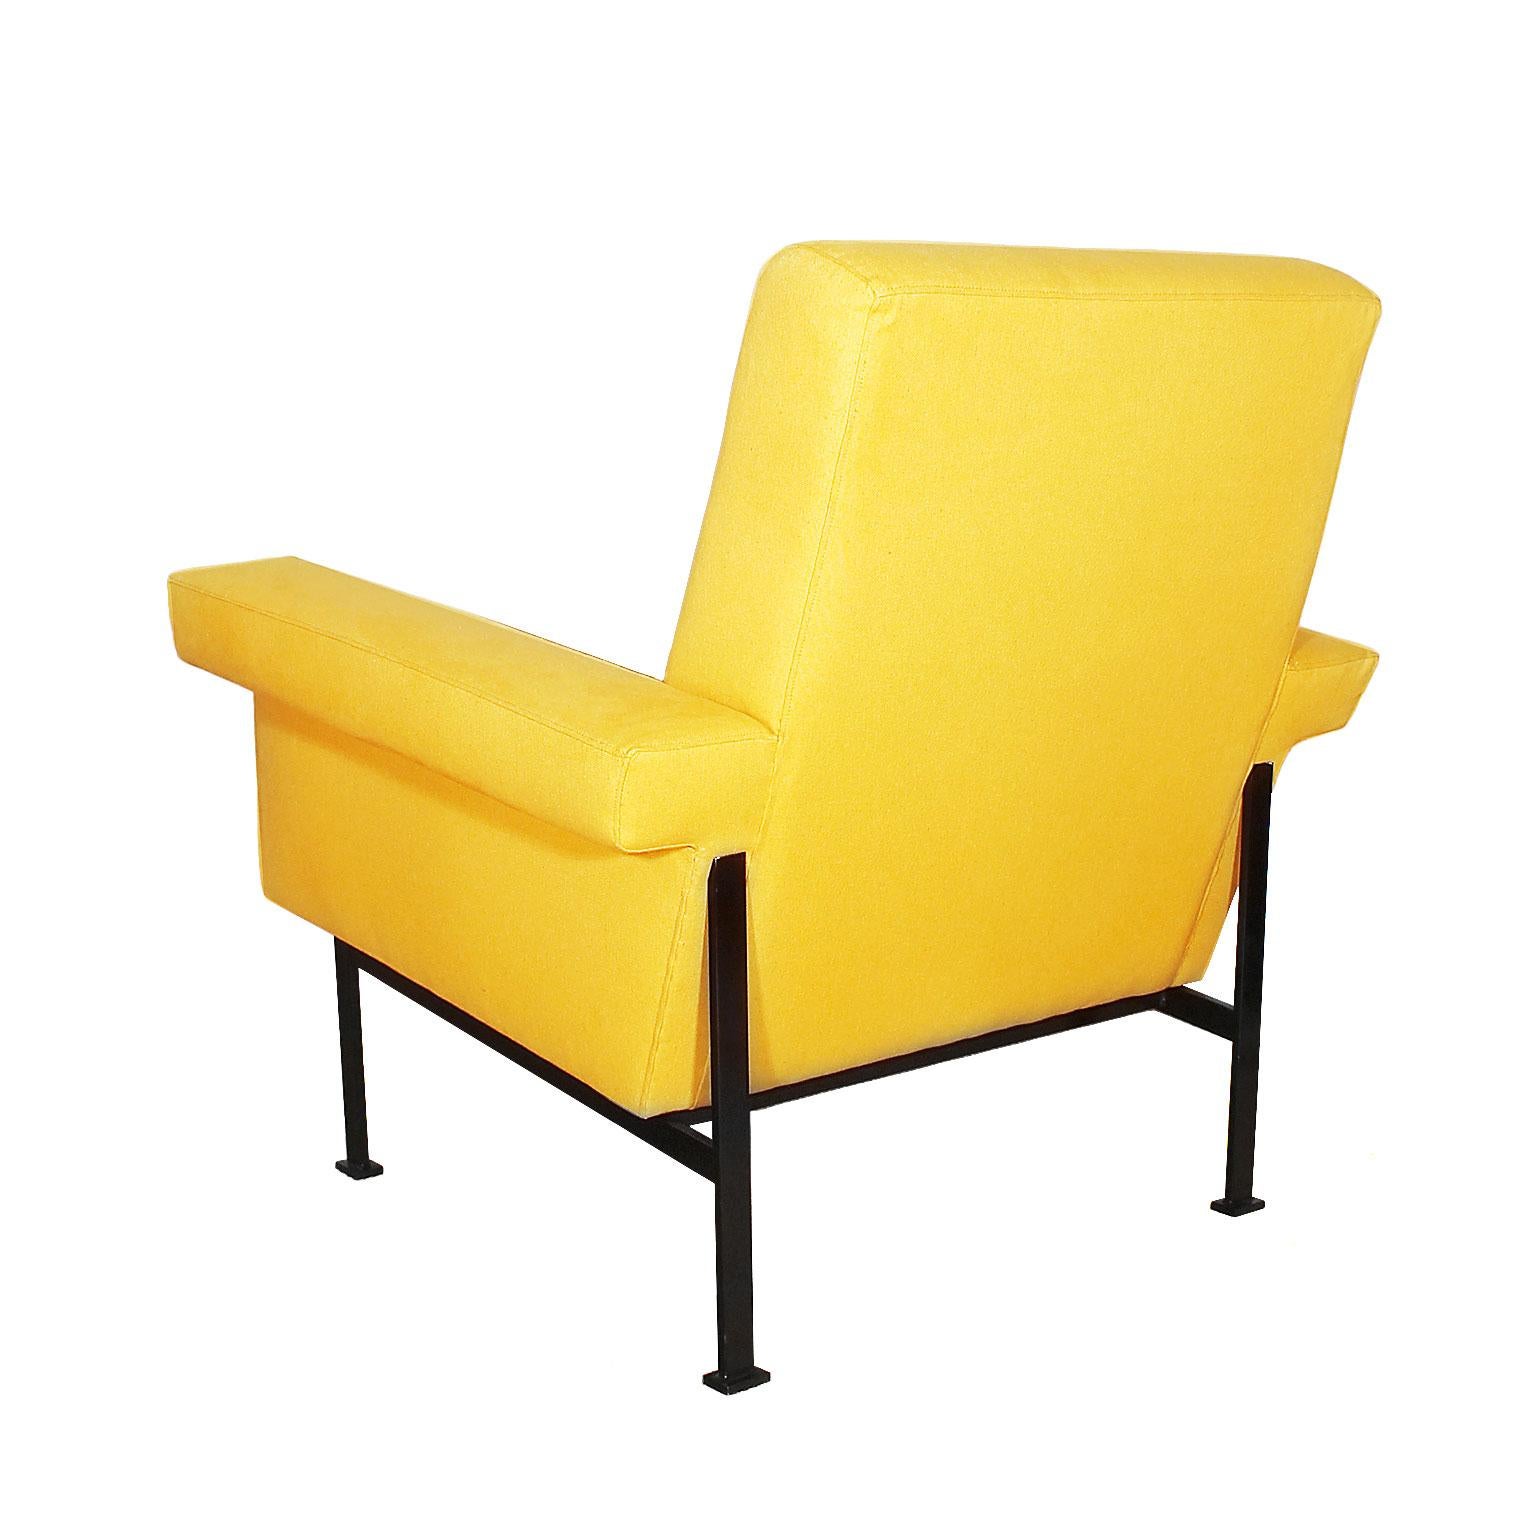 Mid-20th Century 1960s Pair of Cubist Armchairs, Wrought Iron, Yellow Cotton Upholstery, Italy